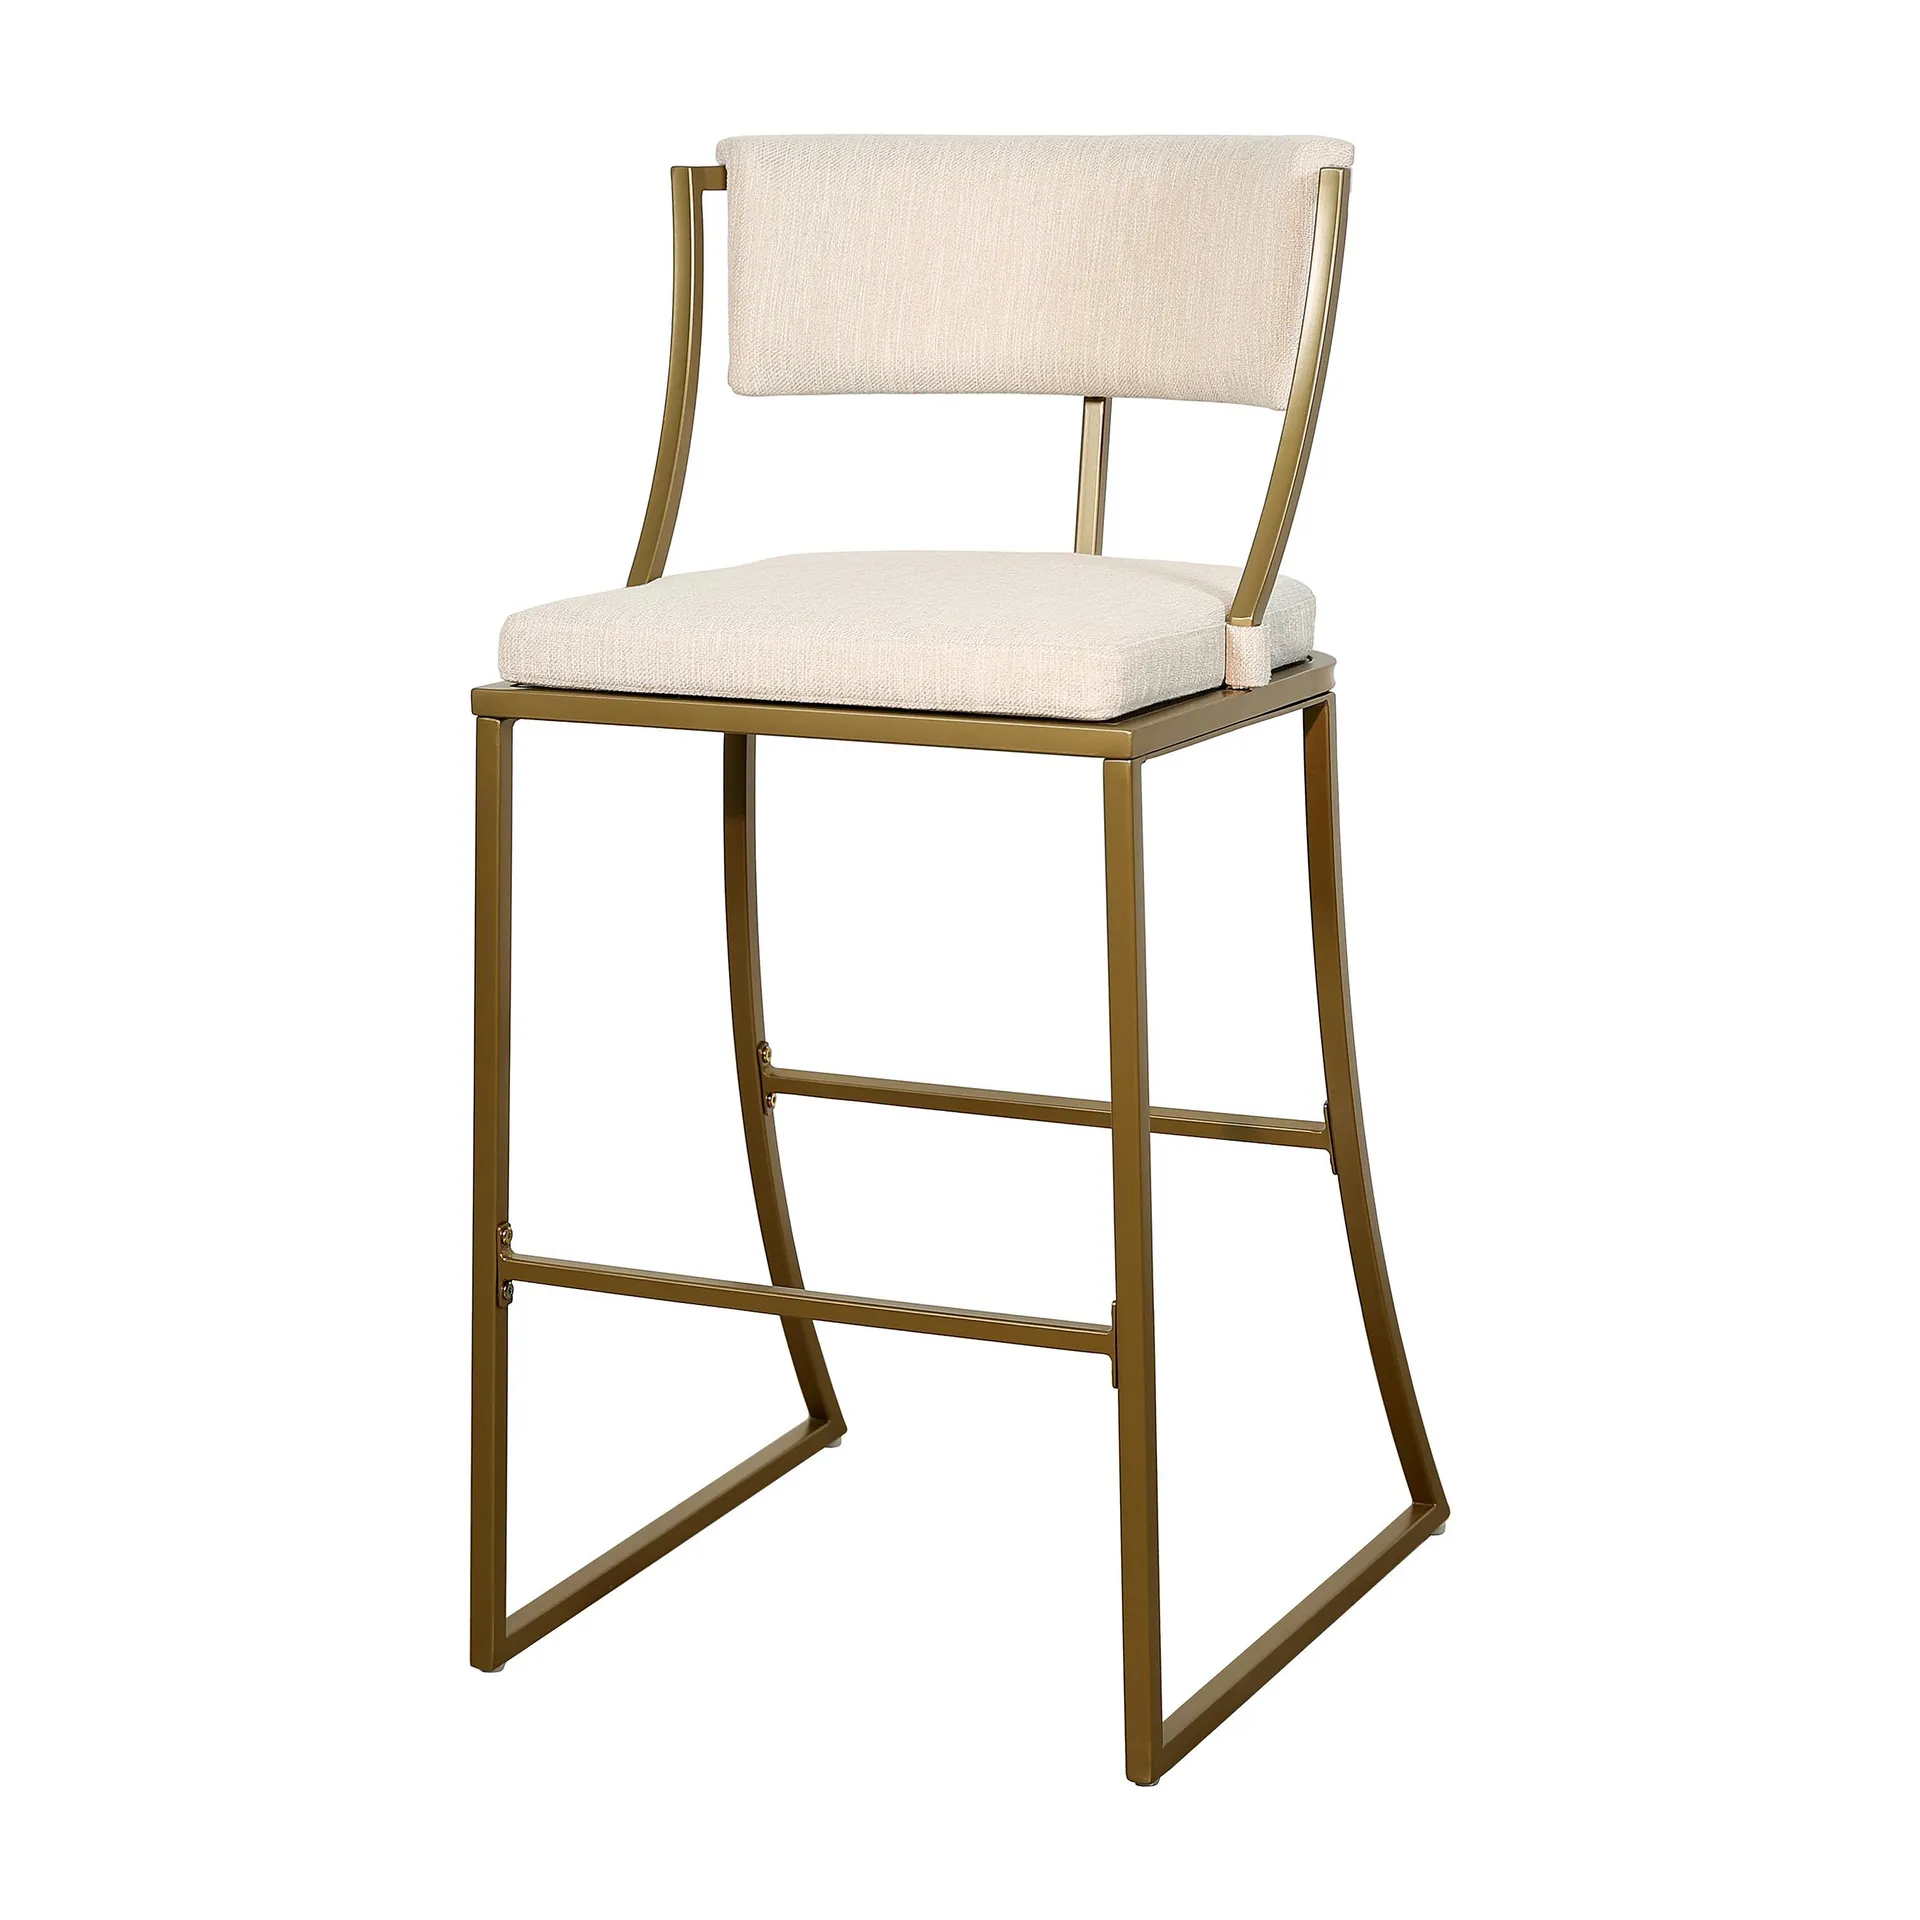 Bar-Height Metal Bar Stool with Back, 30"H - Antique Brass